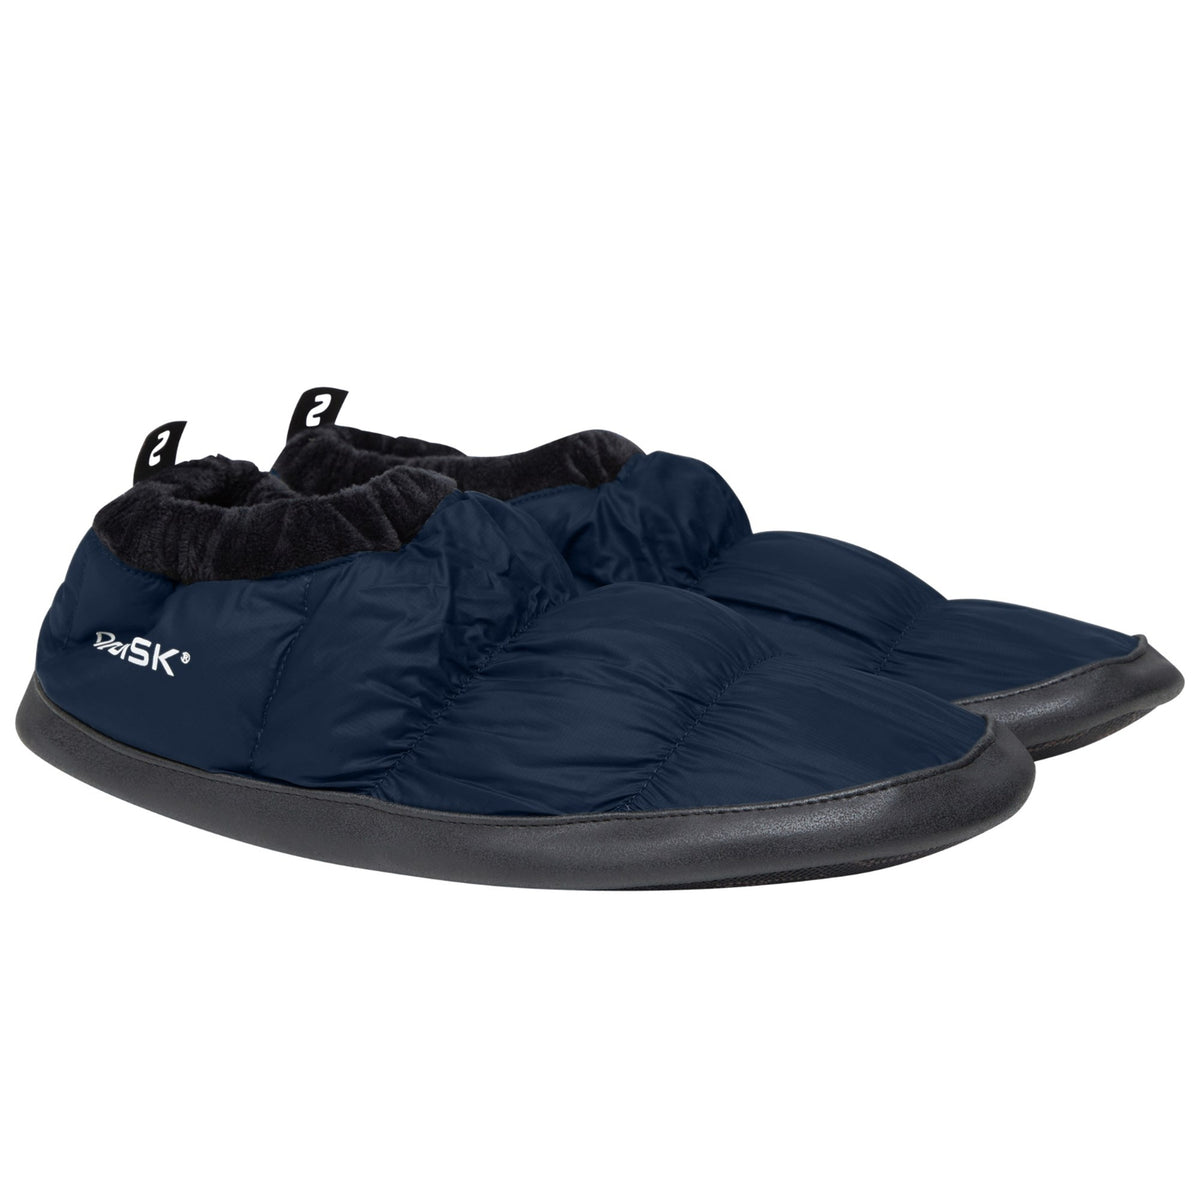 Nordisk Mos Down Slippers dress blue